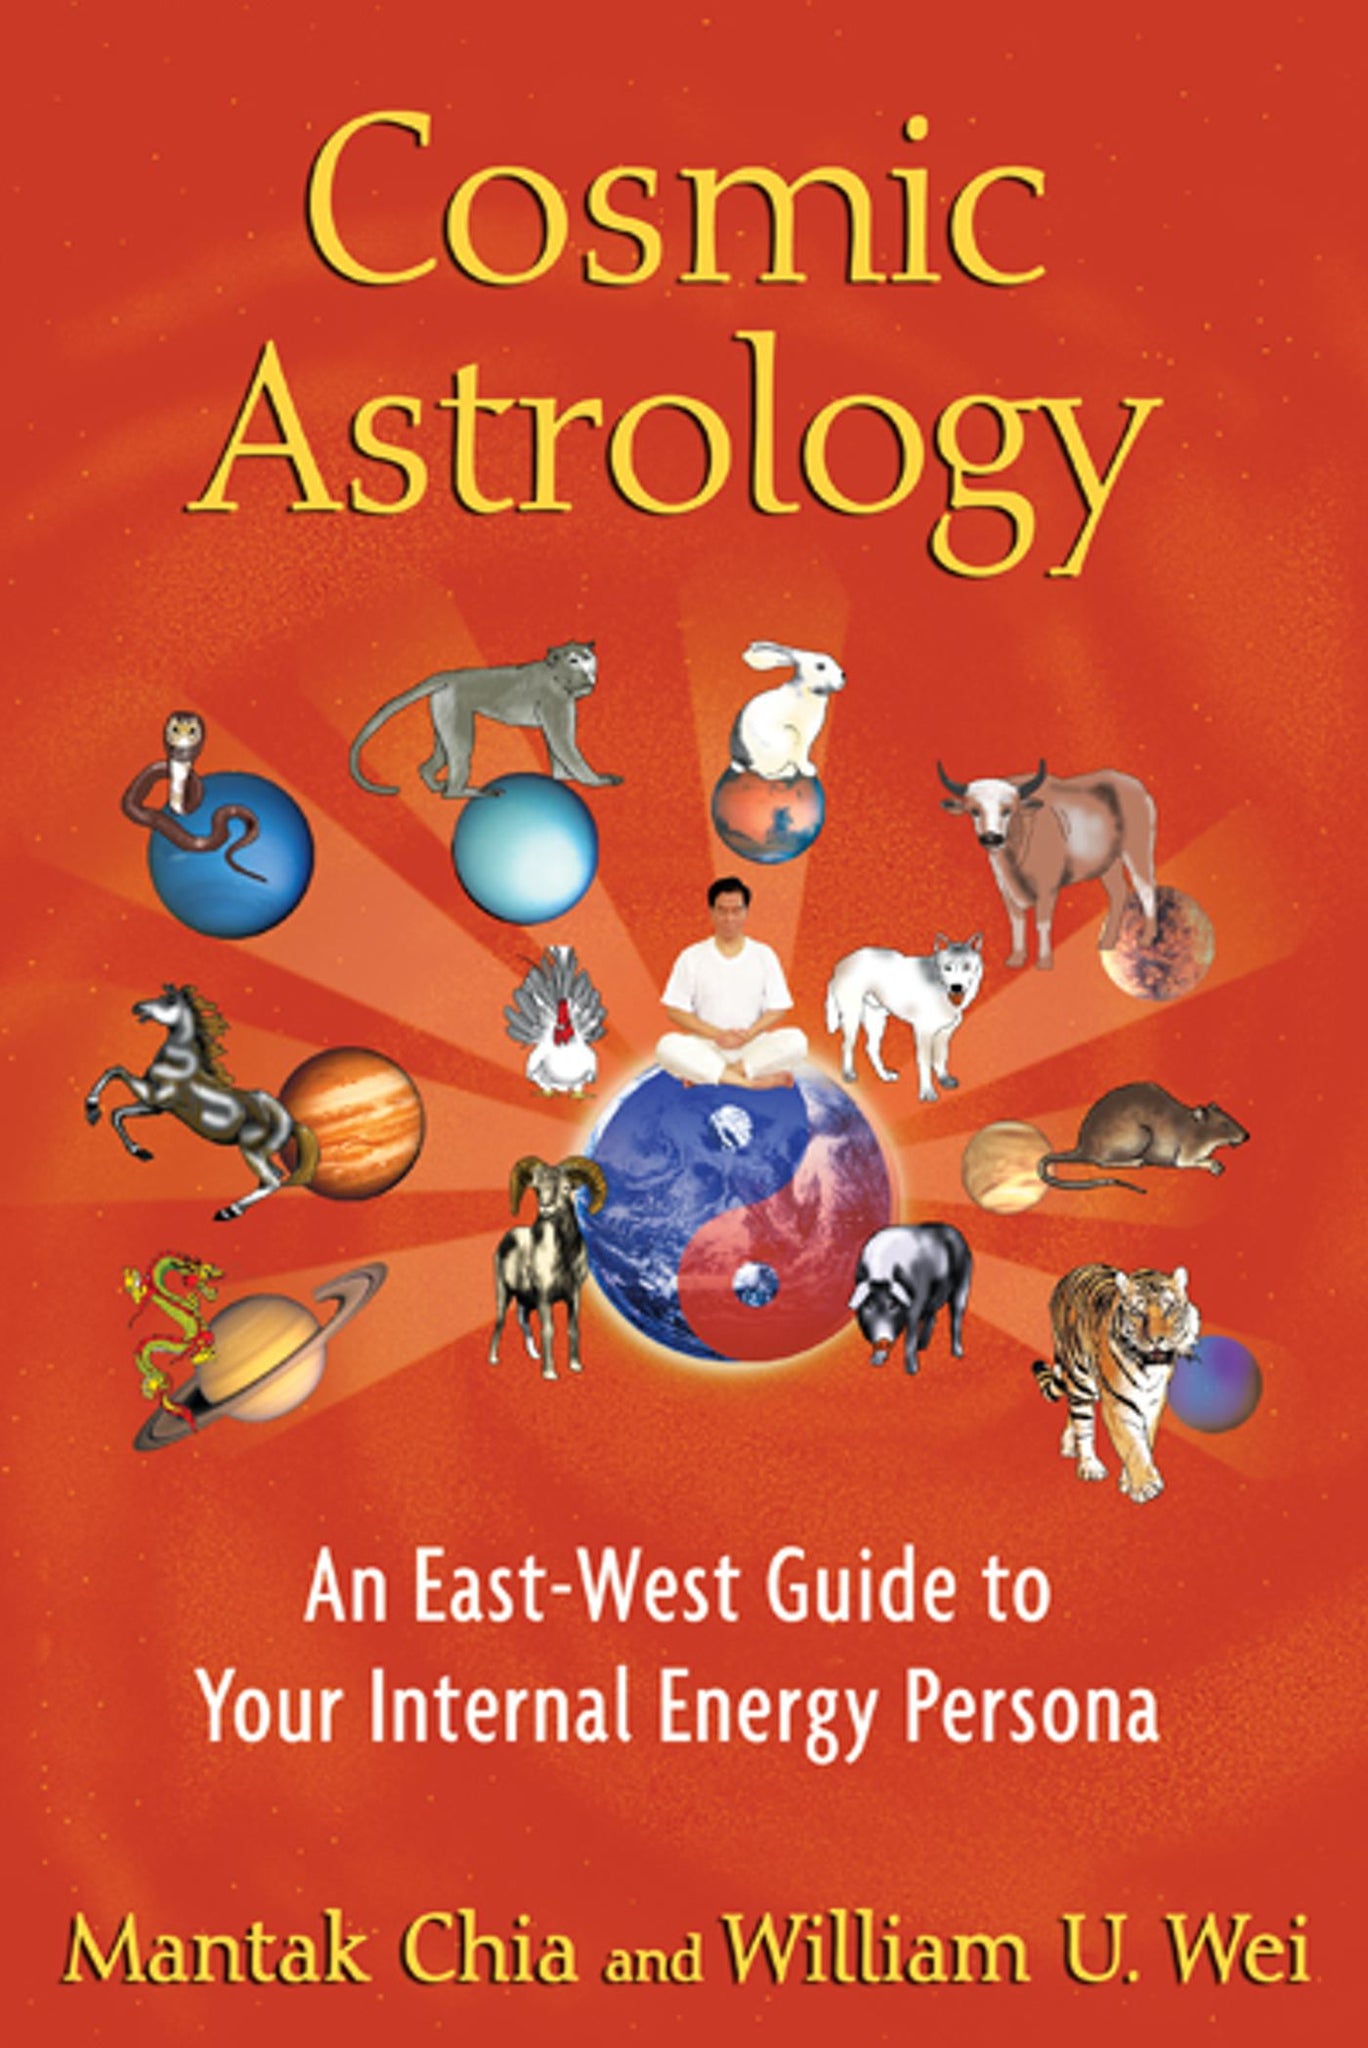 Cosmic Astrology : An East-West Guide to Your Internal Energy Persona